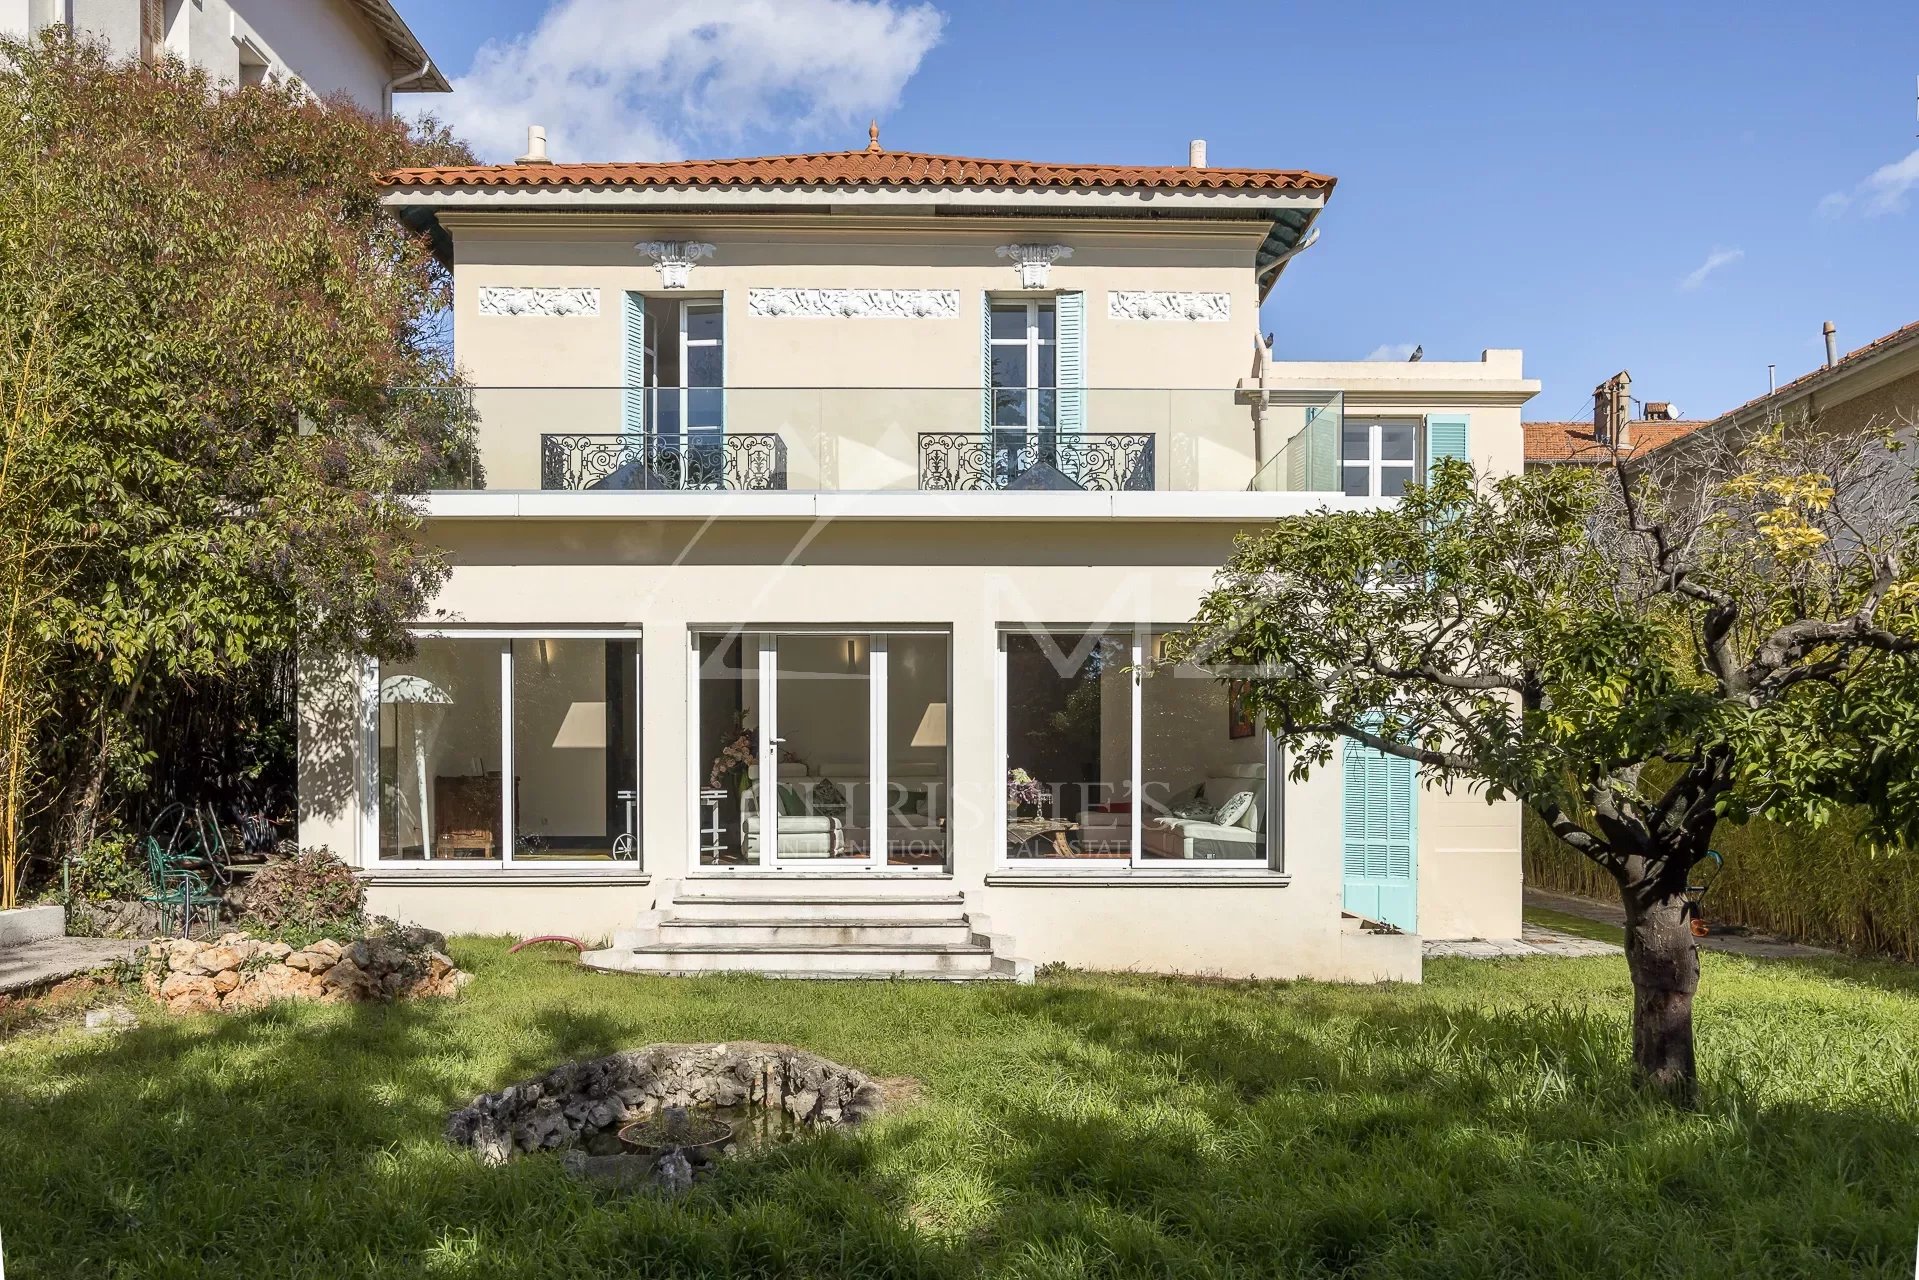 Close to Cannes - Le Cannet - Villa Art Deco from the 30s renovated